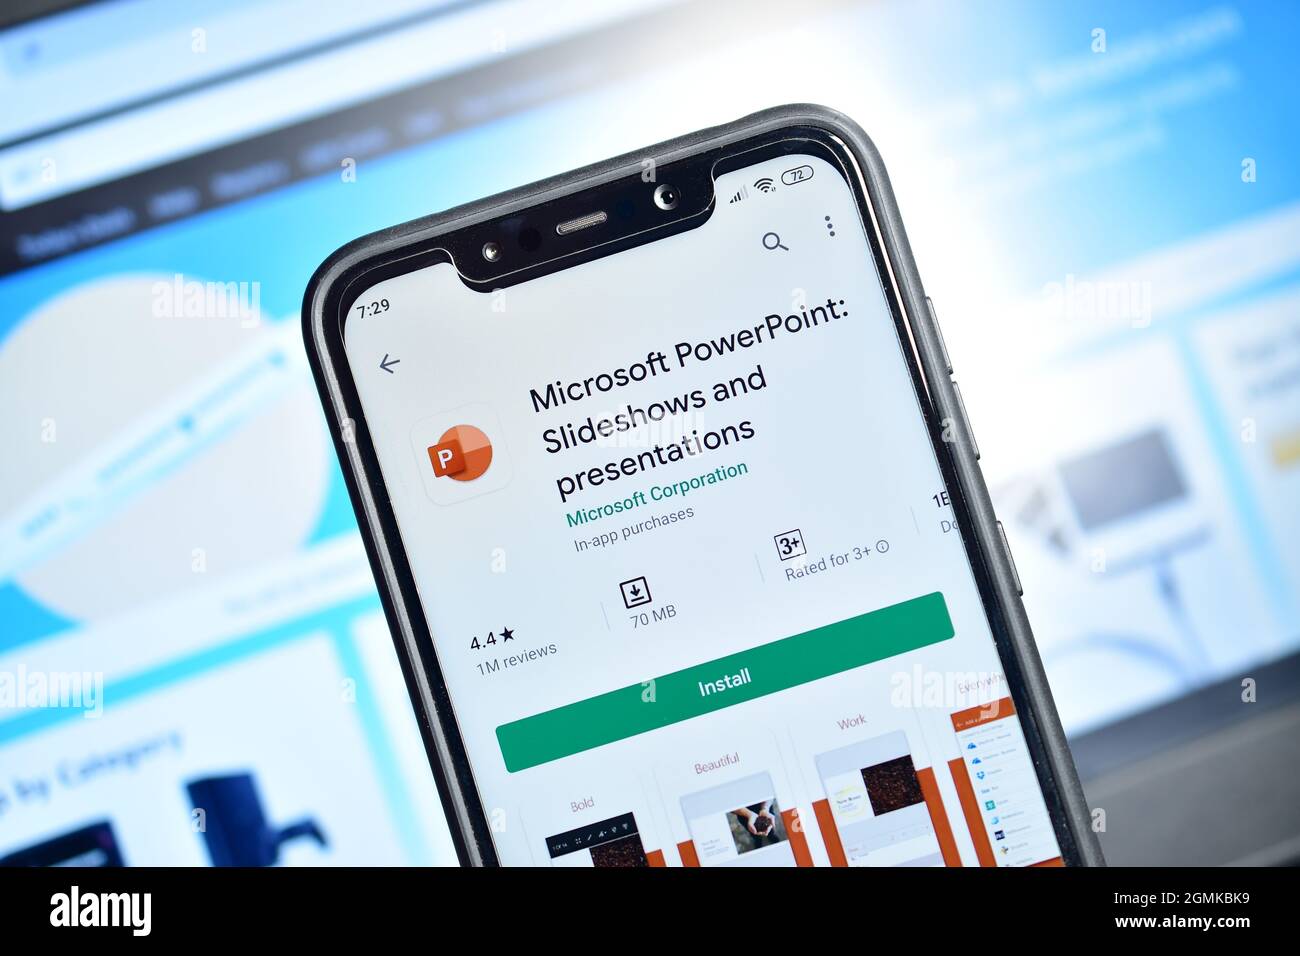 New Delhi, India - February 10, 2020: Microsoft Power Point and Presentation Application on Smartphone, PPT app Stock Photo